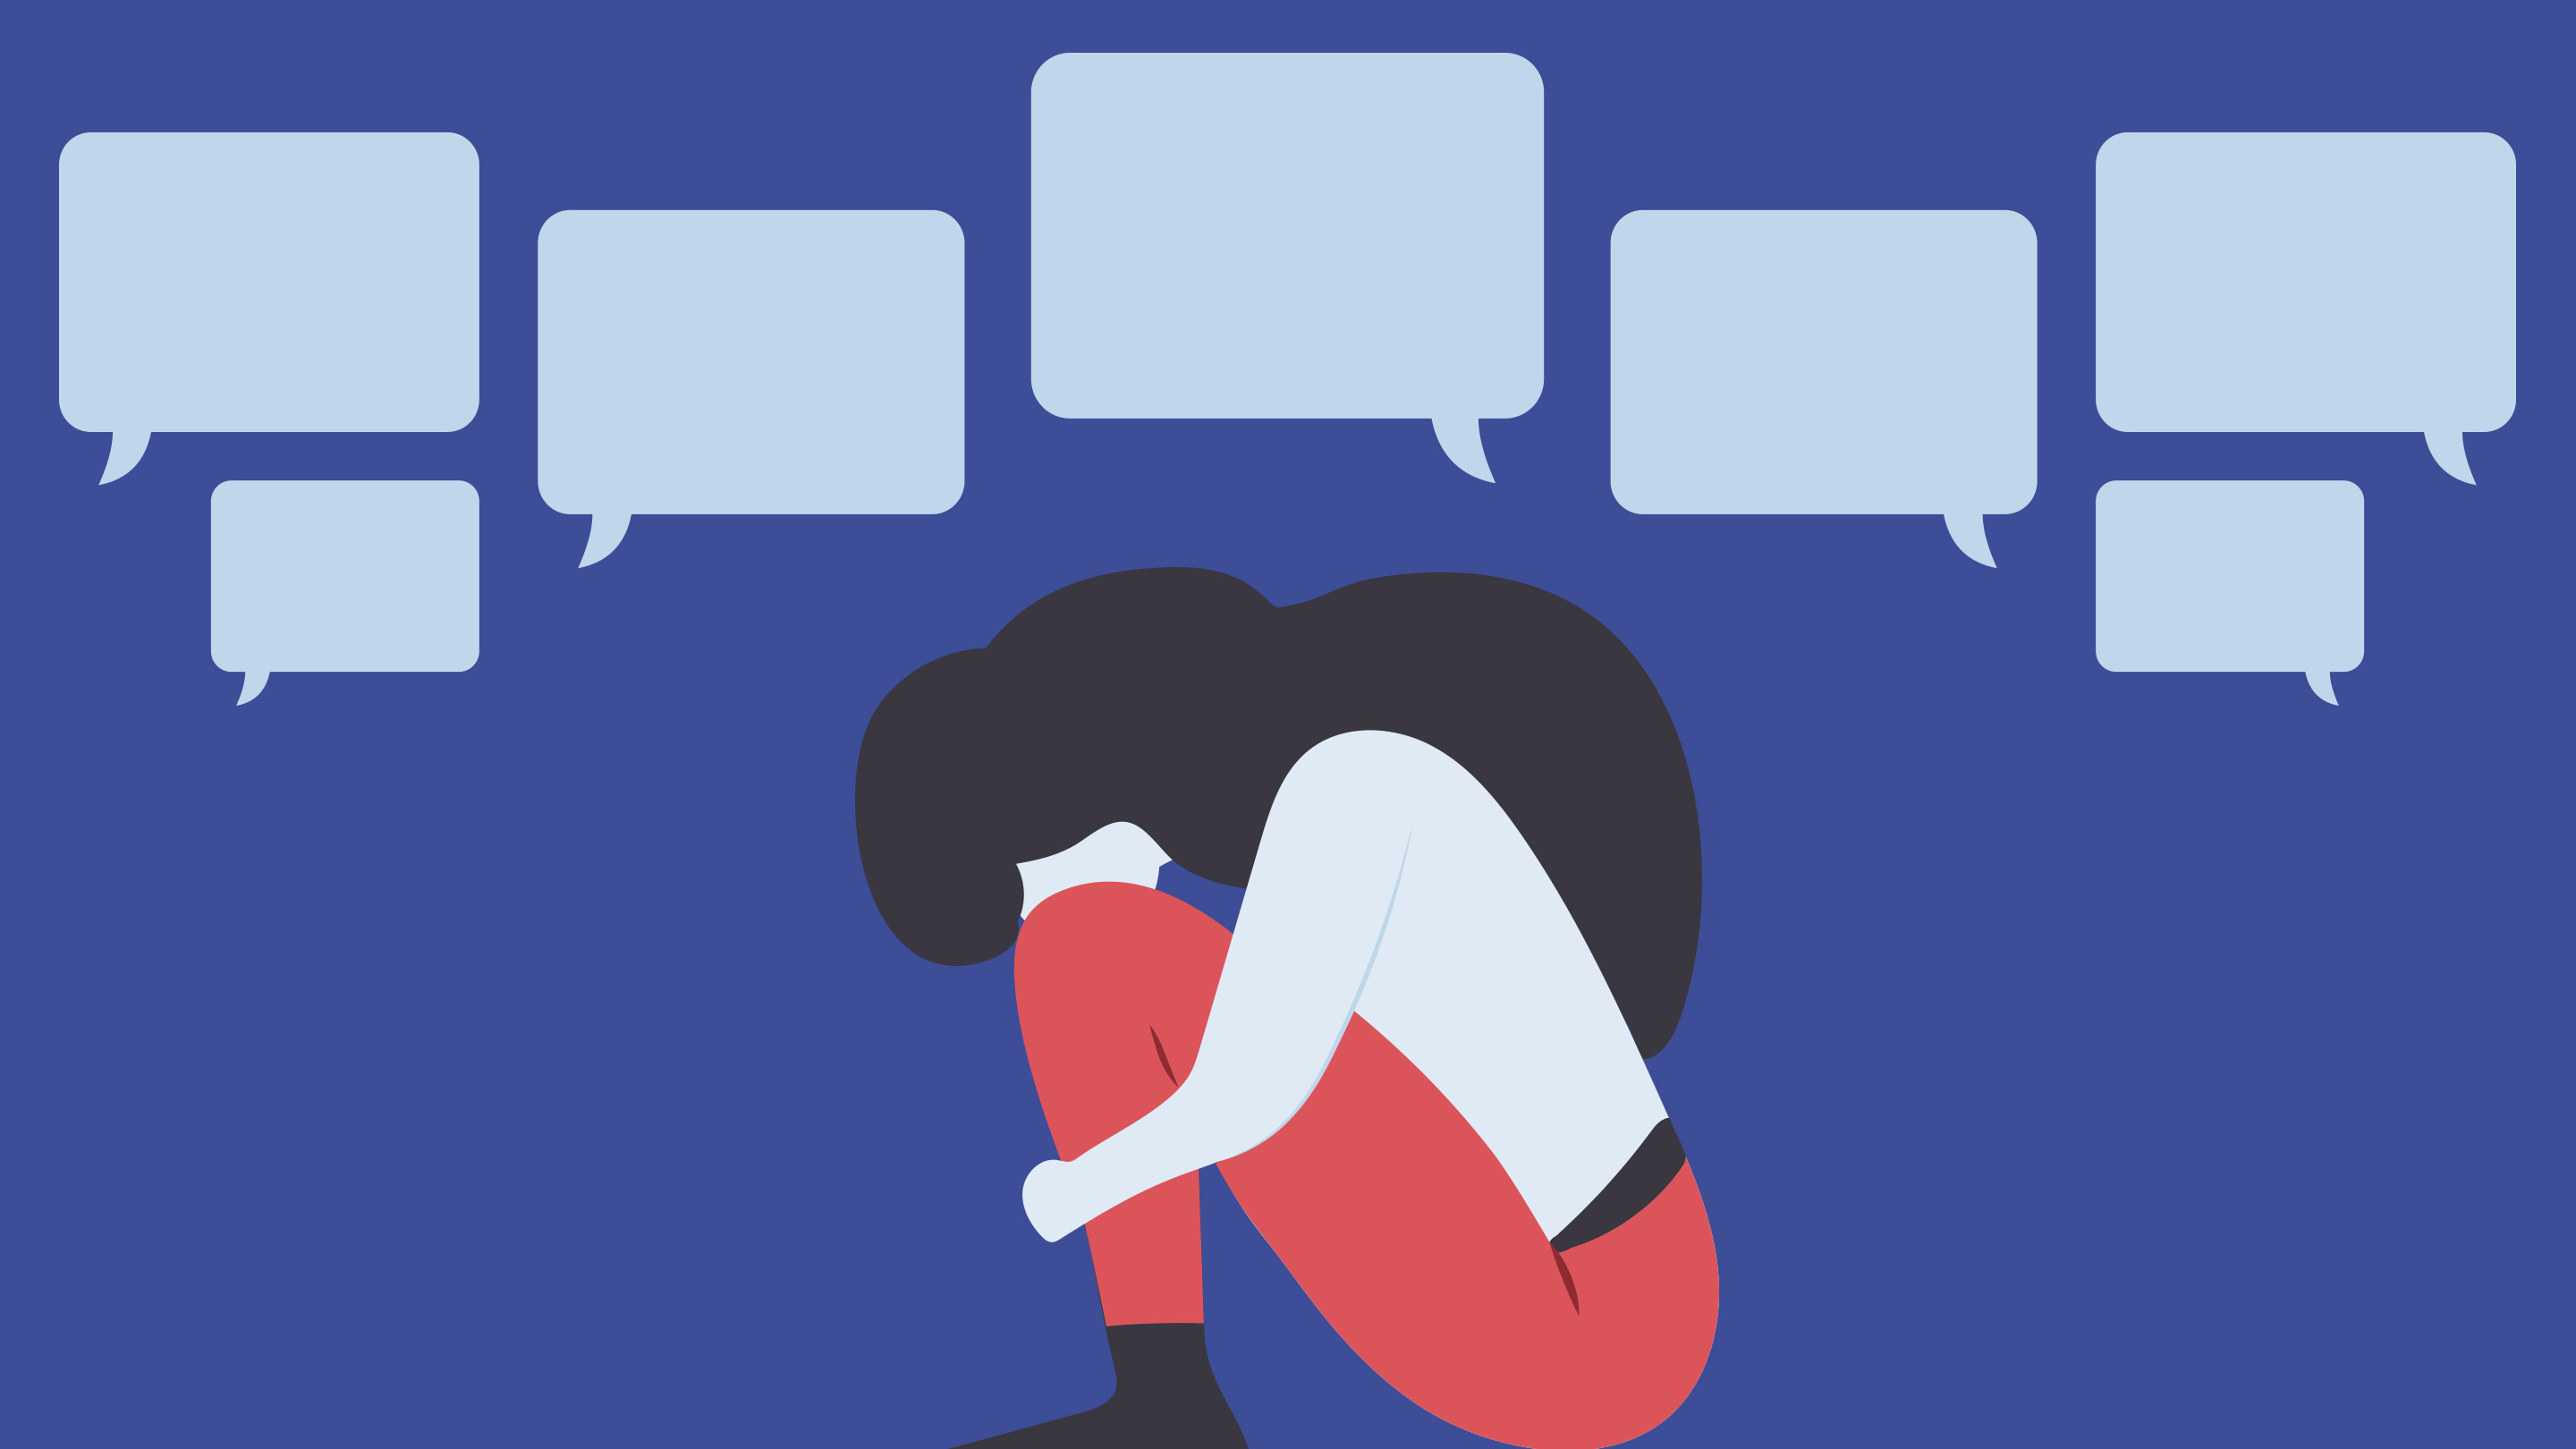 6 ways educators can prevent bullying in schools